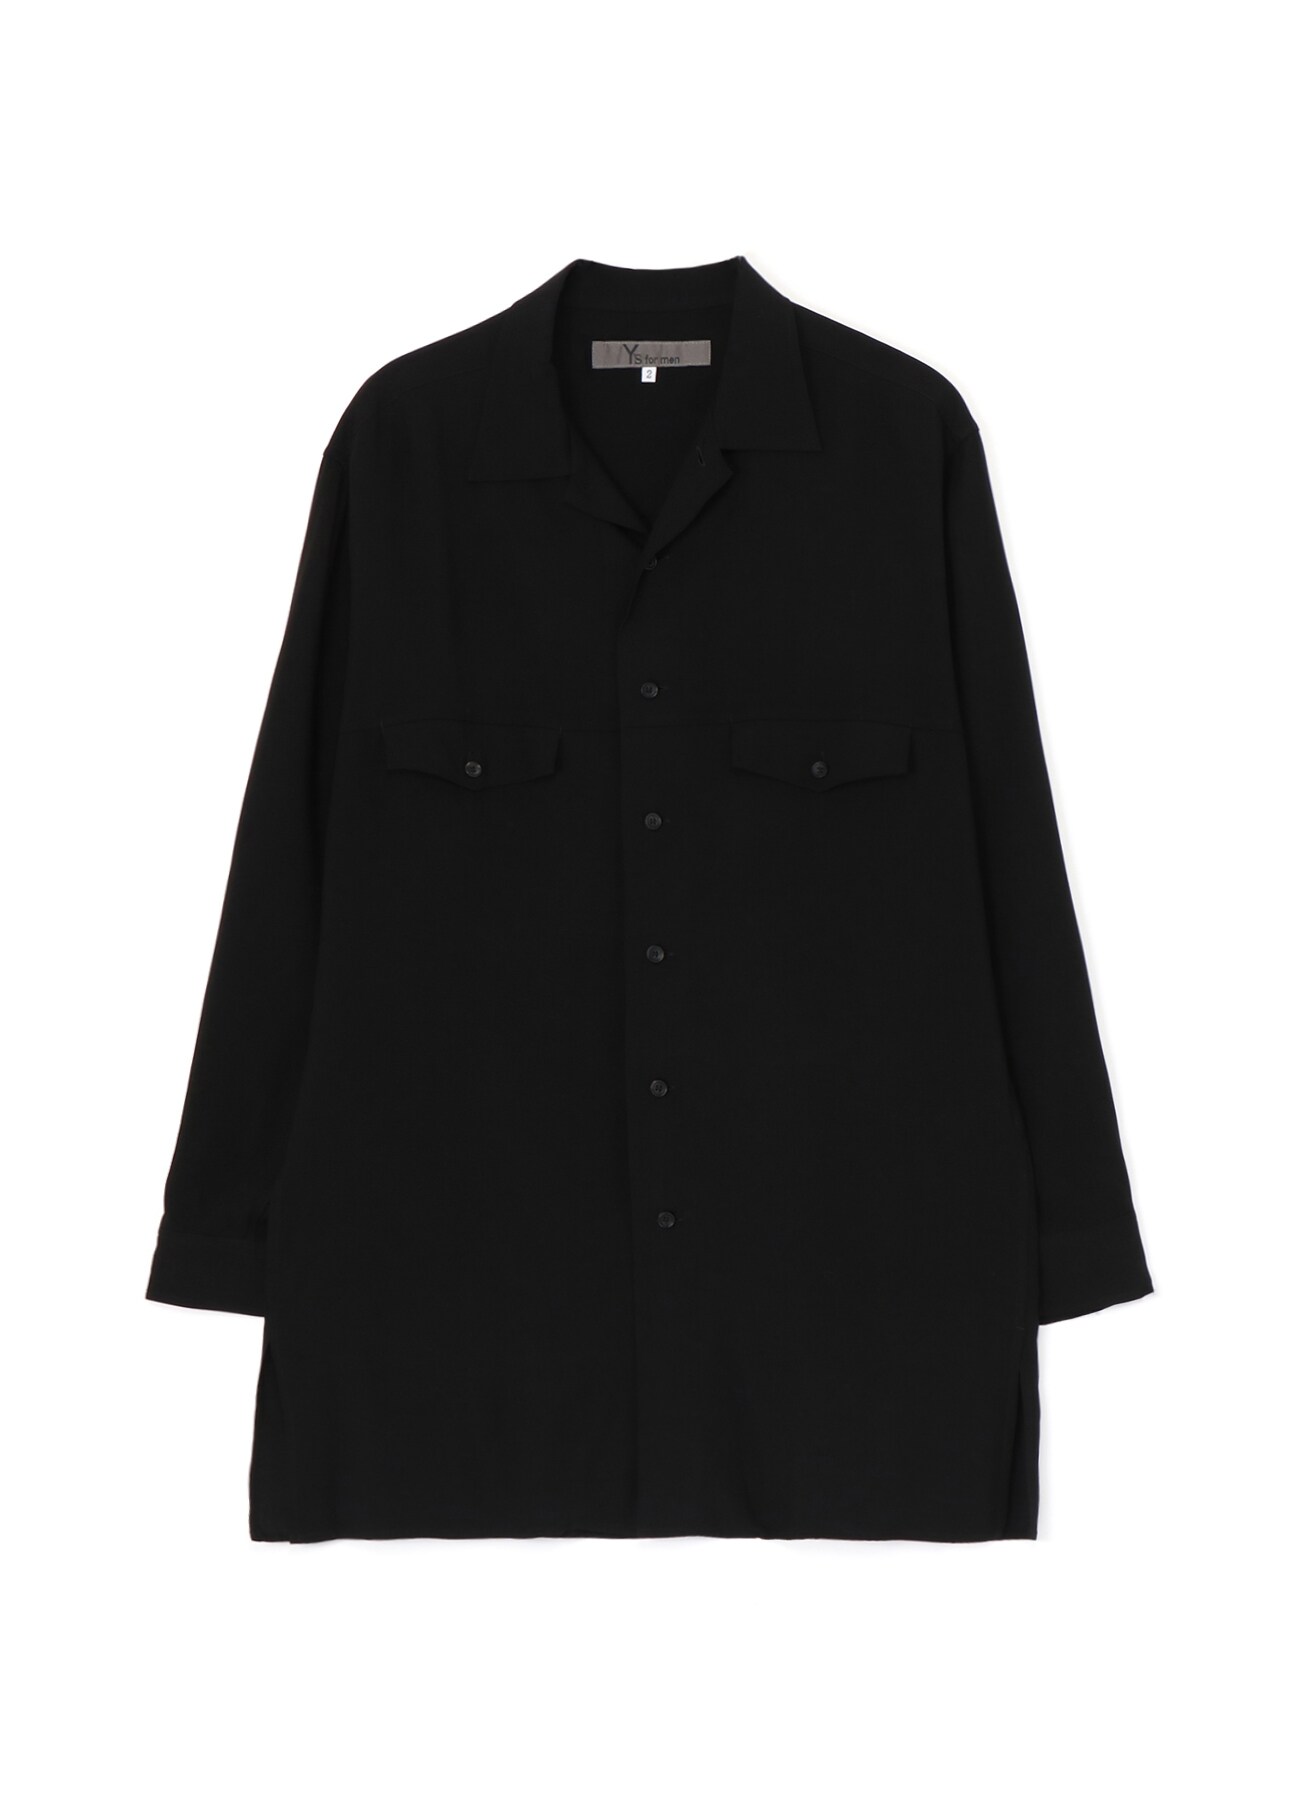 RAYON CAMBRIC SHIRT WITH FLAP POCKETS